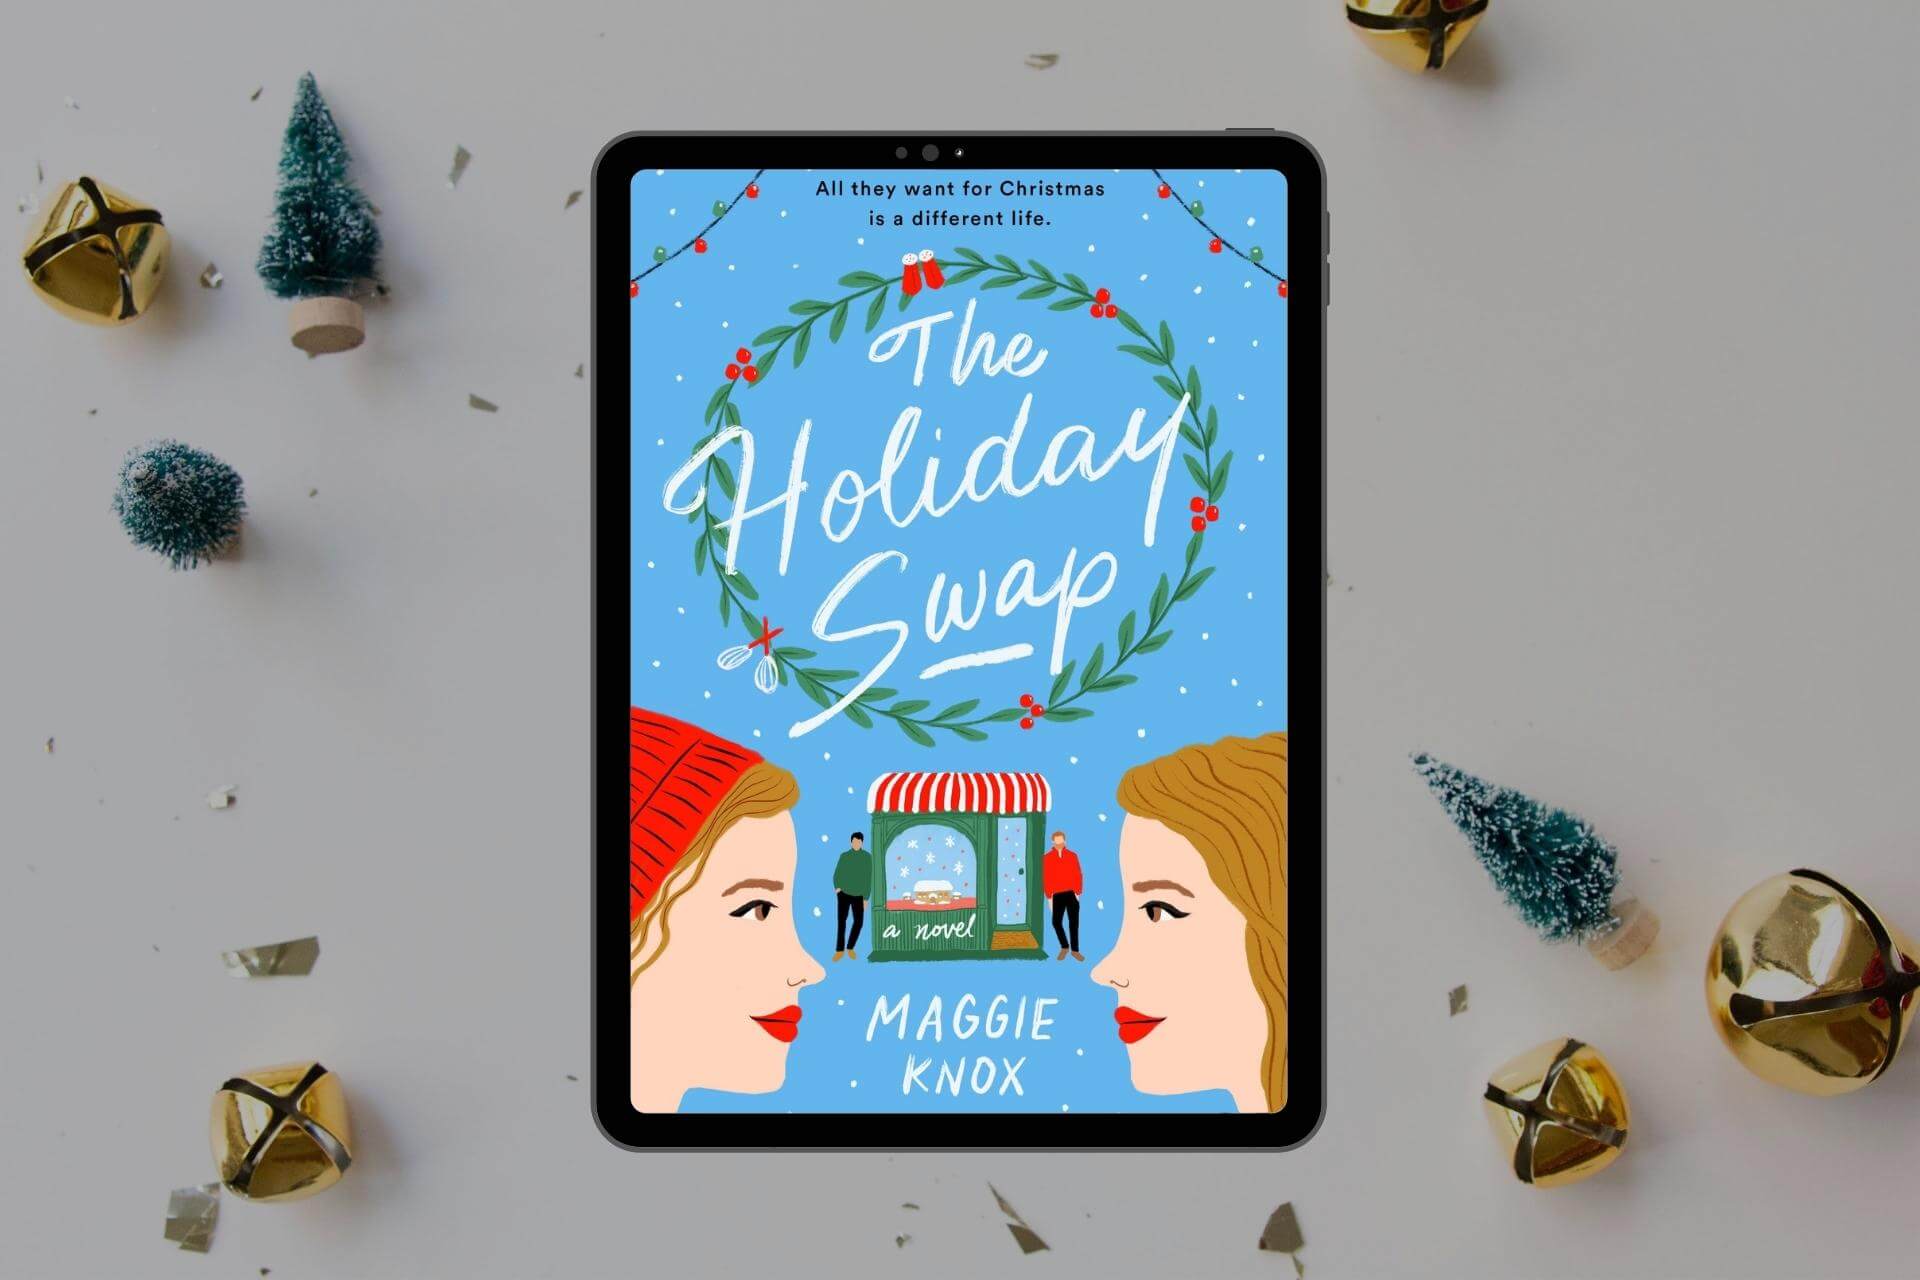 Book Club Questions for The Holiday Swap by Maggie Knox